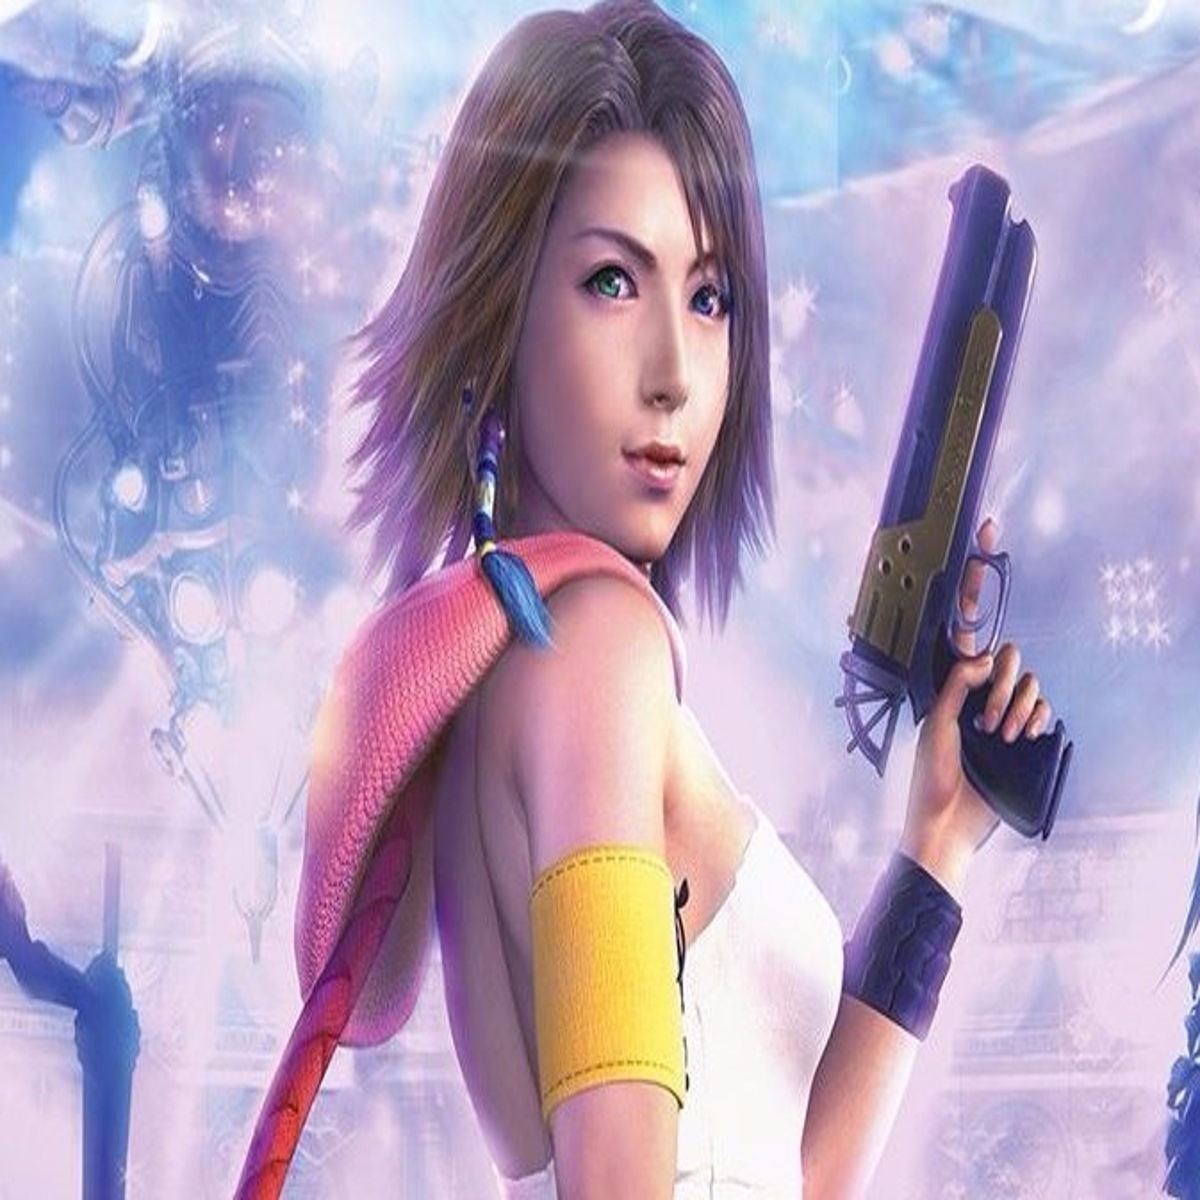 Final Fantasy X HD Remaster Review (PS4) - #MaybeinMarch - Witch's